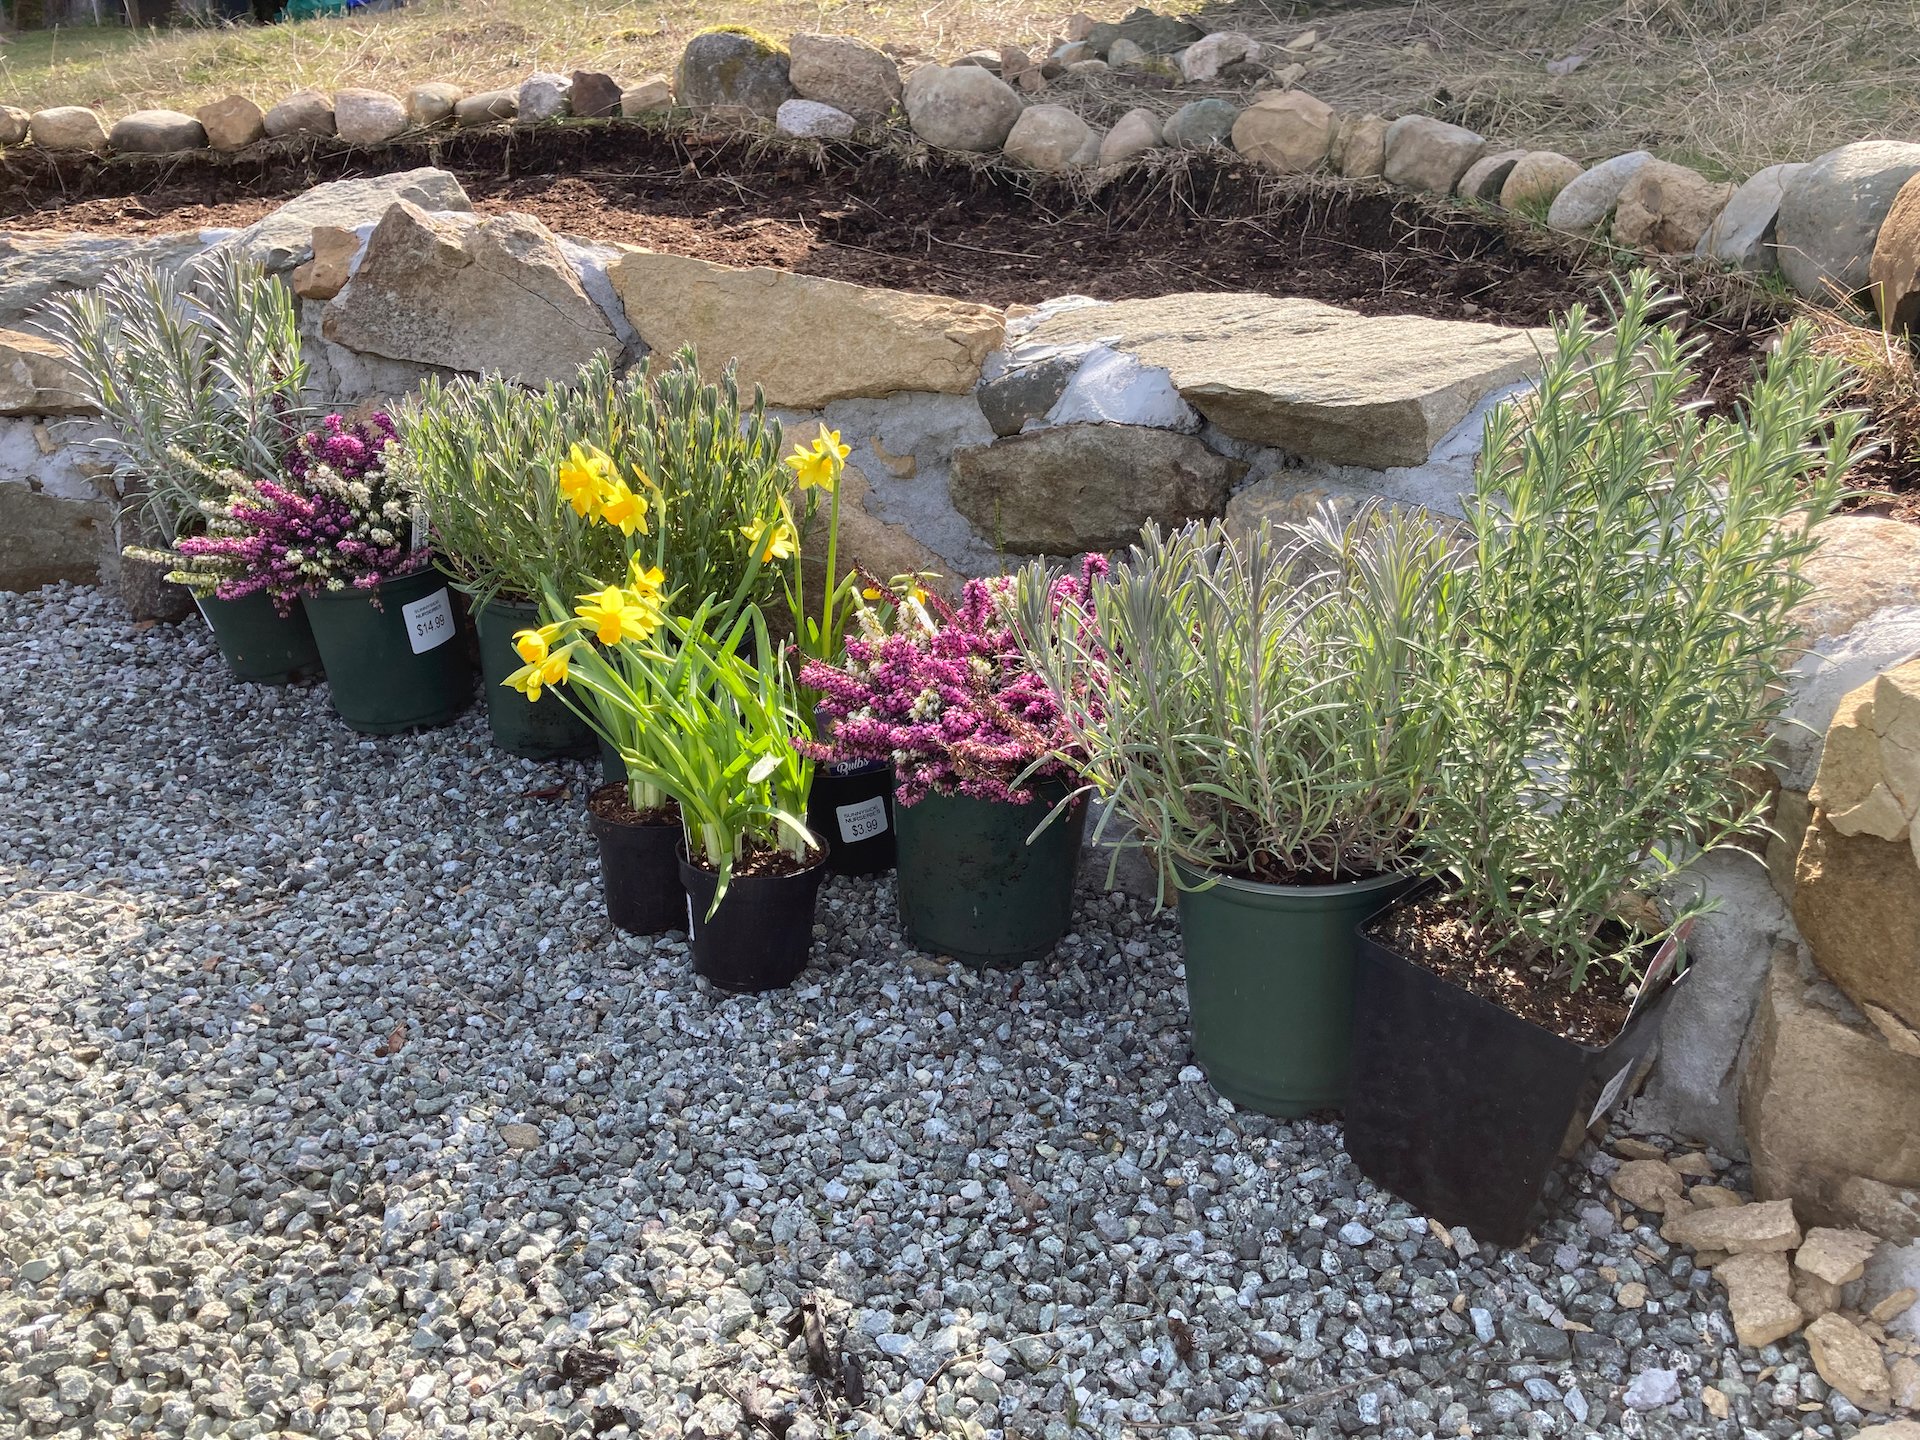  The flowers ready for planting. Hopefully the deer will leave these alone… 